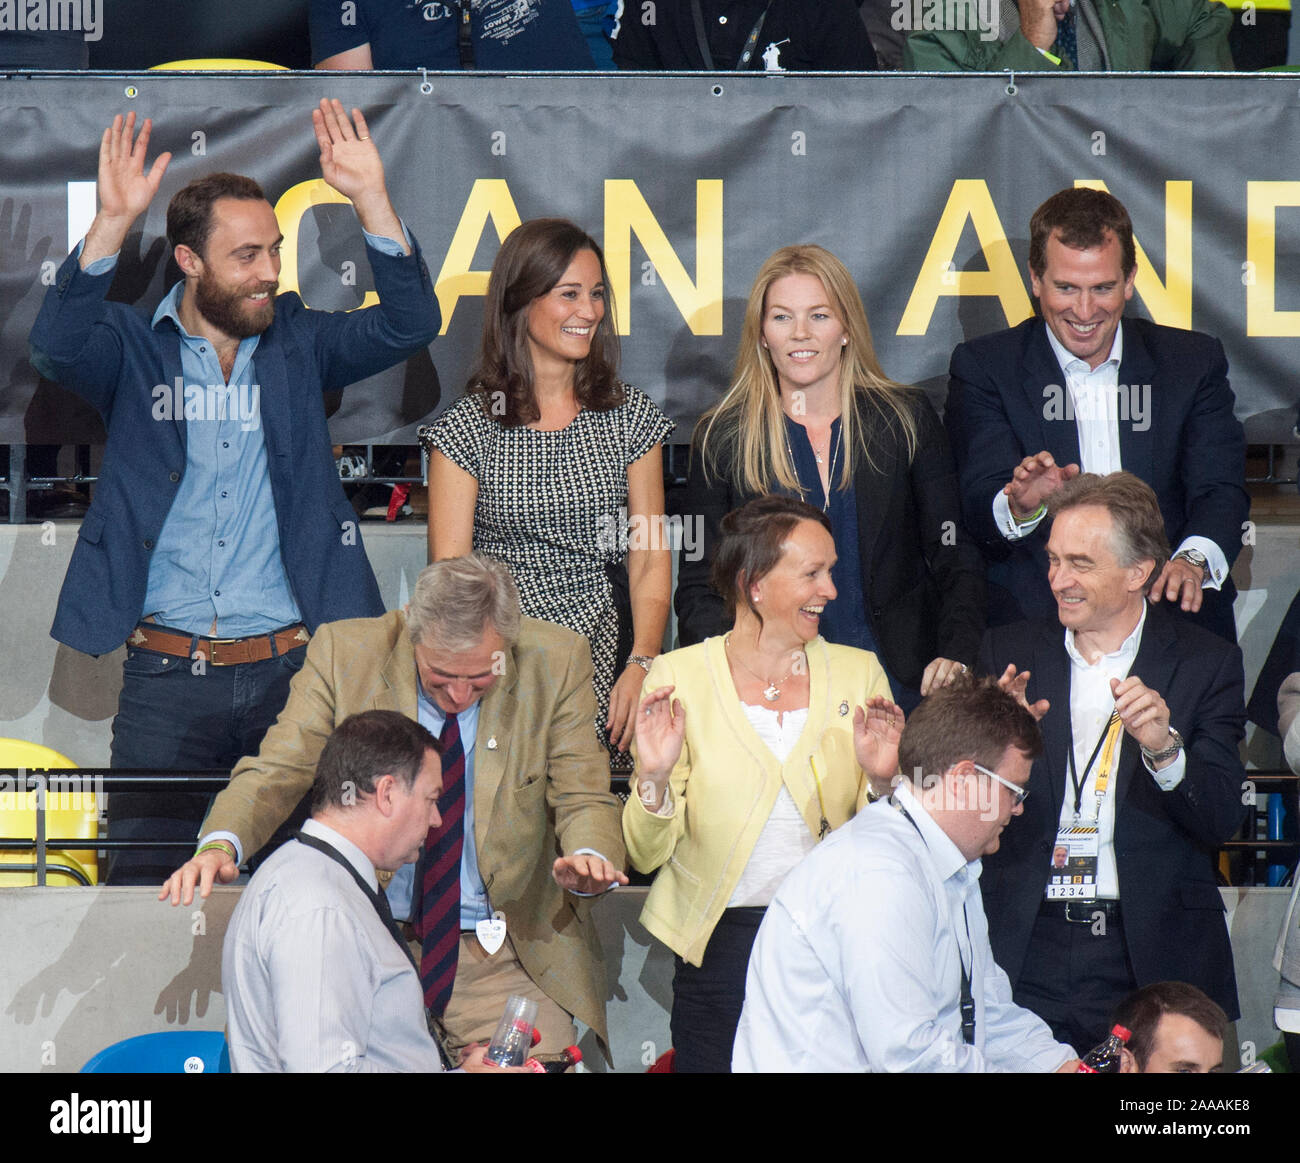 James and Pippa Middleton with Peter and Autumn Phillips watching Prince Harry, Zara and Mike Tindall compete in a celebrity wheelchair rugby game at the Invictus games in London. September 2014 Stock Photo